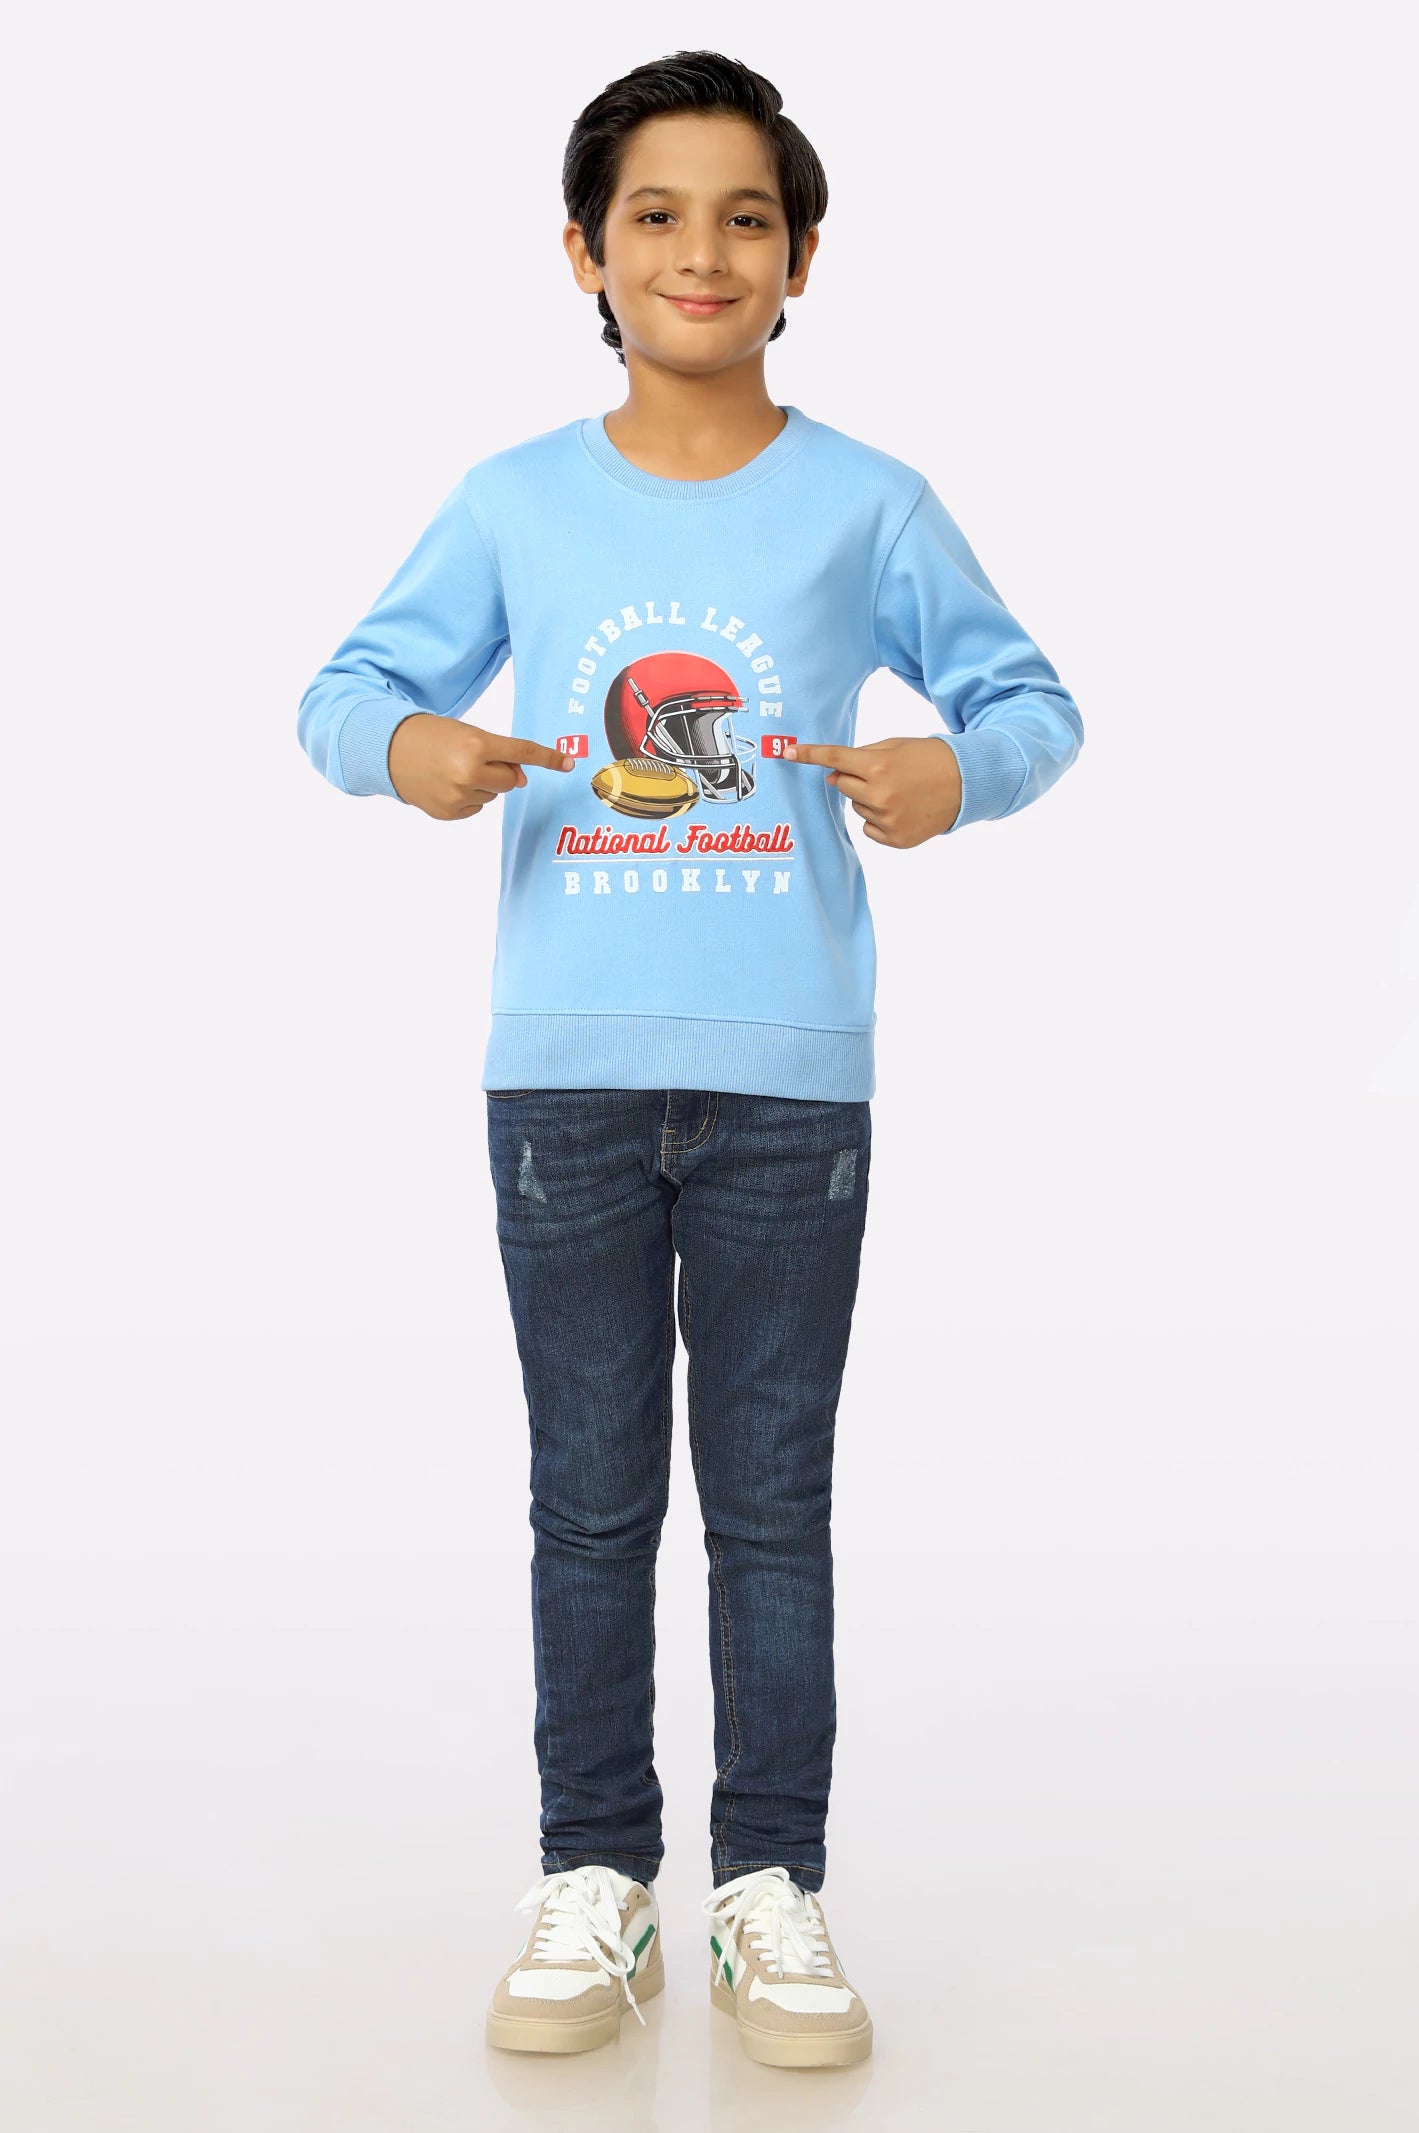 Blue Graphic Printed Boys Sweatshirt From Diners